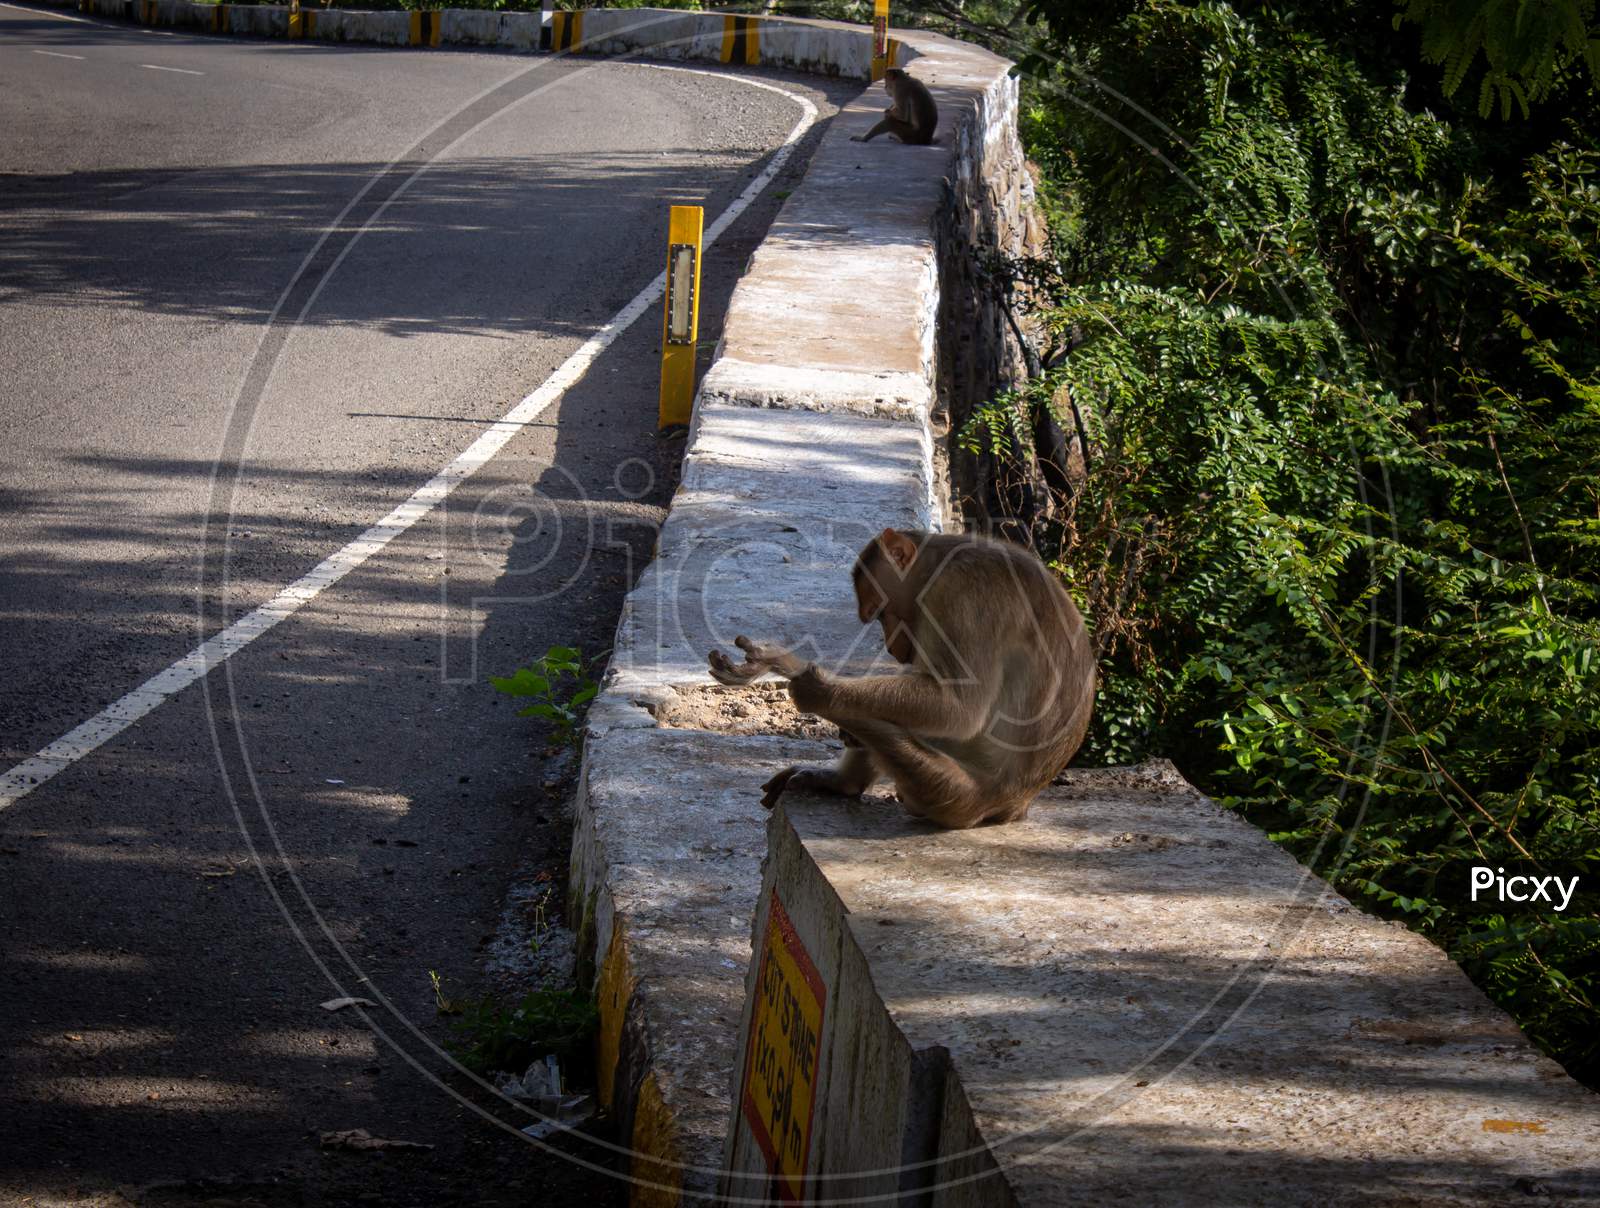 Monkeys Sitting On Parapet Wall Along The Ghat Road To Yercaud, Salem, India. Photographed With Focus On Monkey Body.